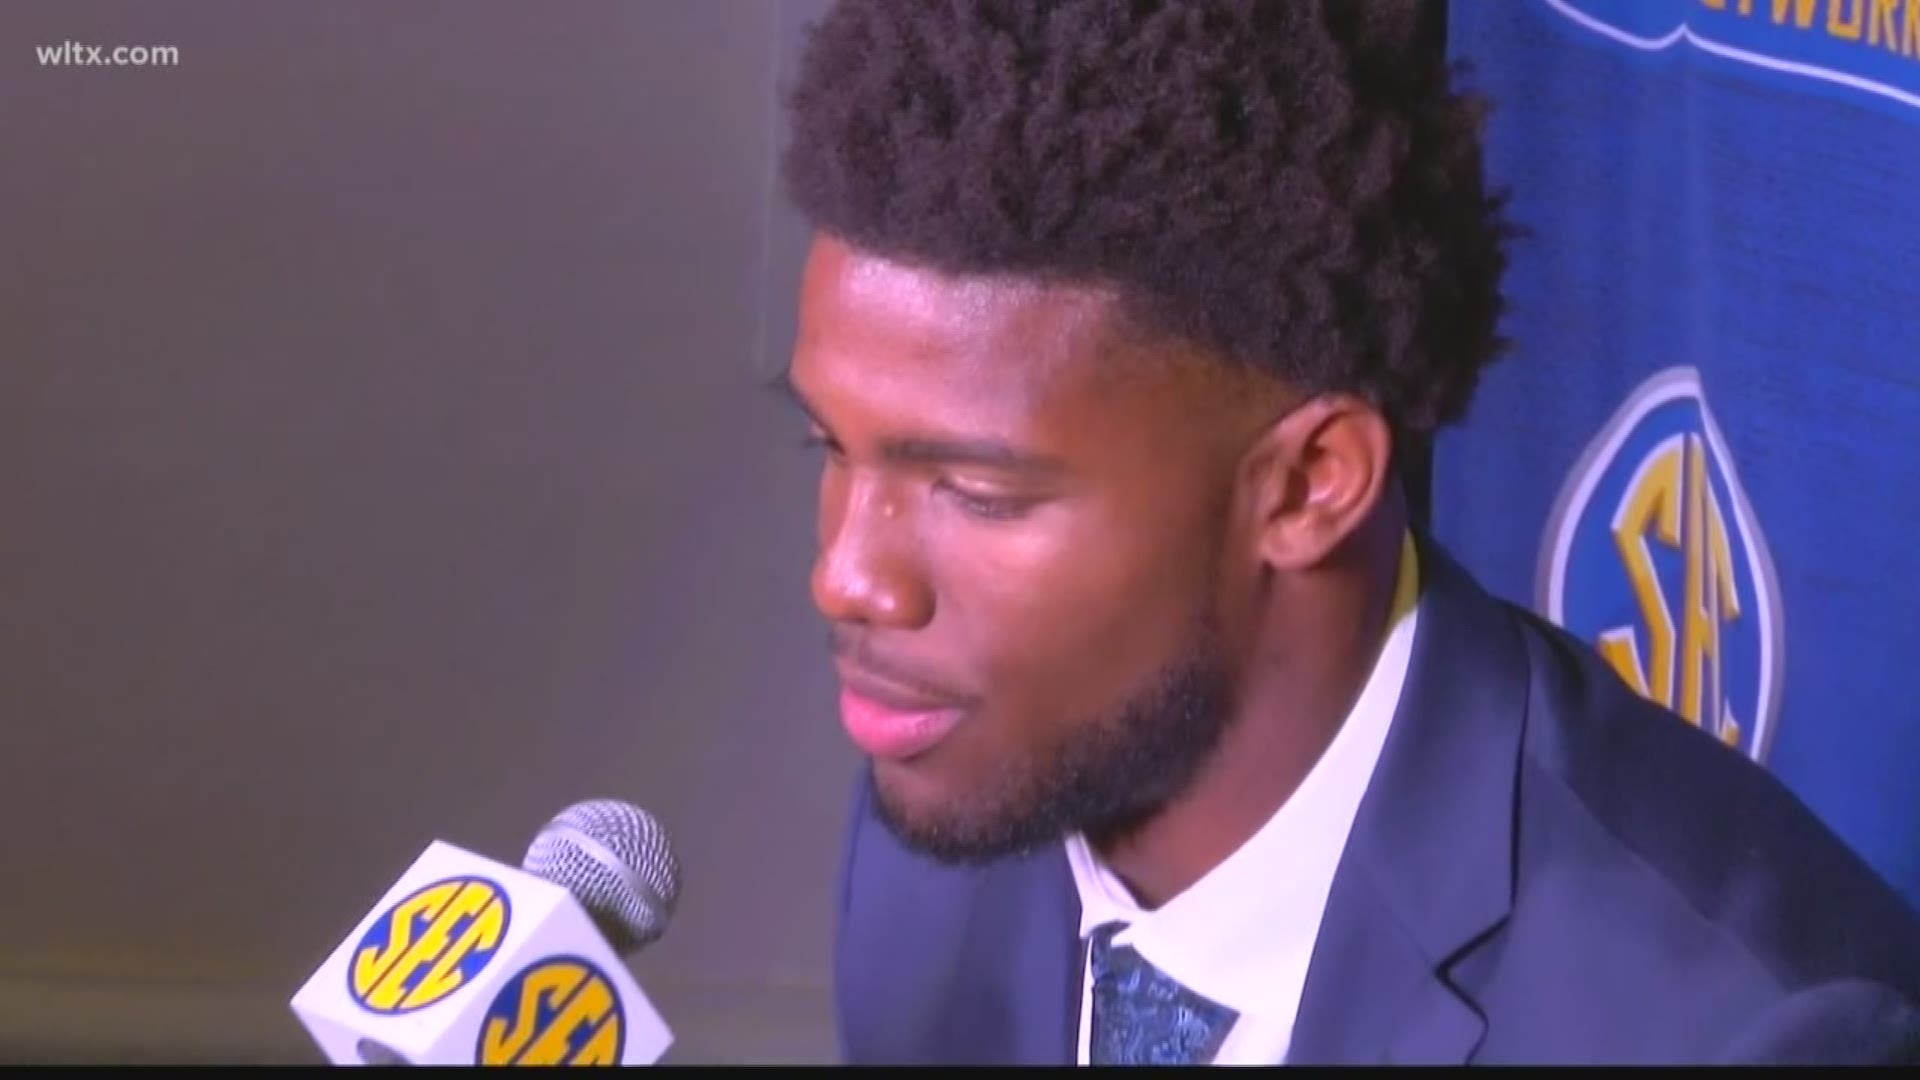 Former Clemson quarterback Kelly Bryant has a new team and he's joined the SEC as a member of the Mizzou Tigers. Kelly talked about why it was tough to leave Clemson but he's comfortable with the decision he made because it was for his growth.